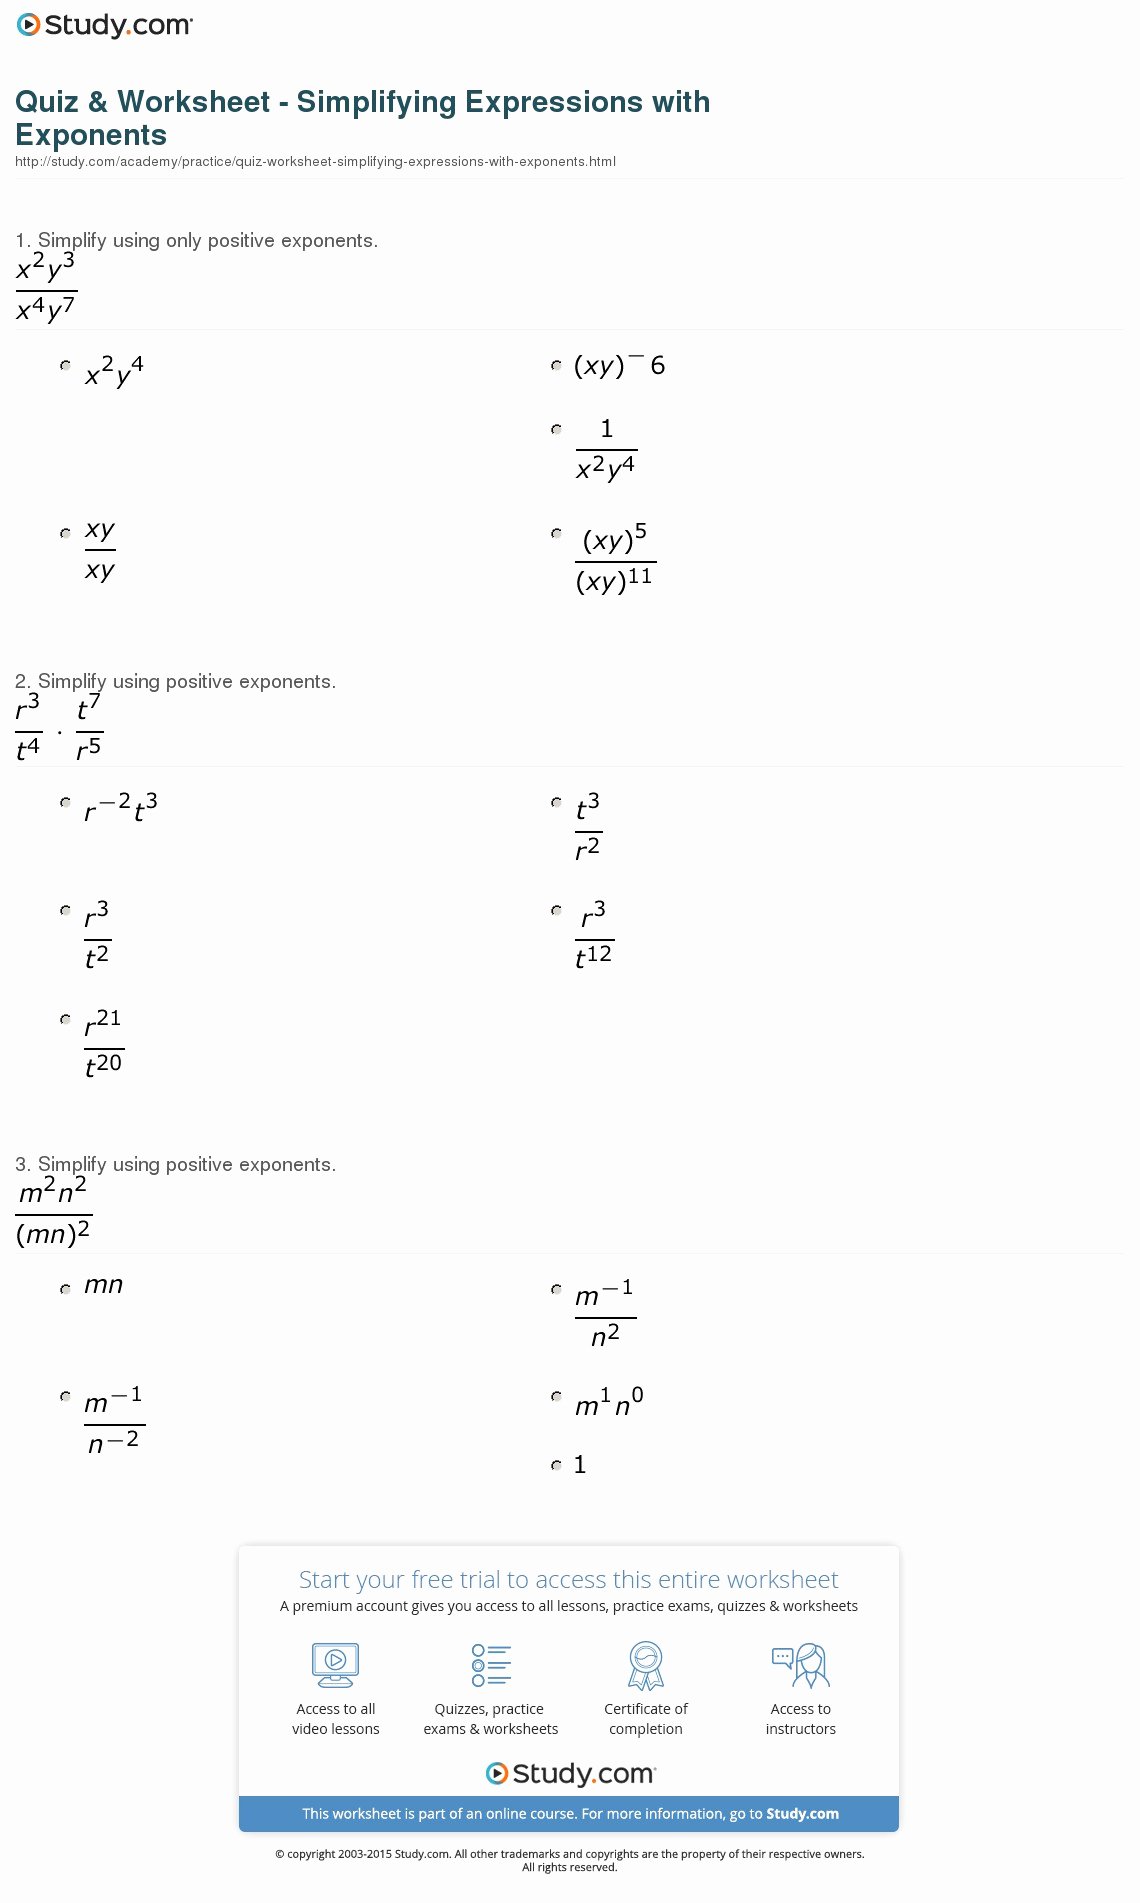 Simplifying Algebraic Expressions Worksheet Answers Elegant Quiz &amp; Worksheet Simplifying Expressions with Exponents